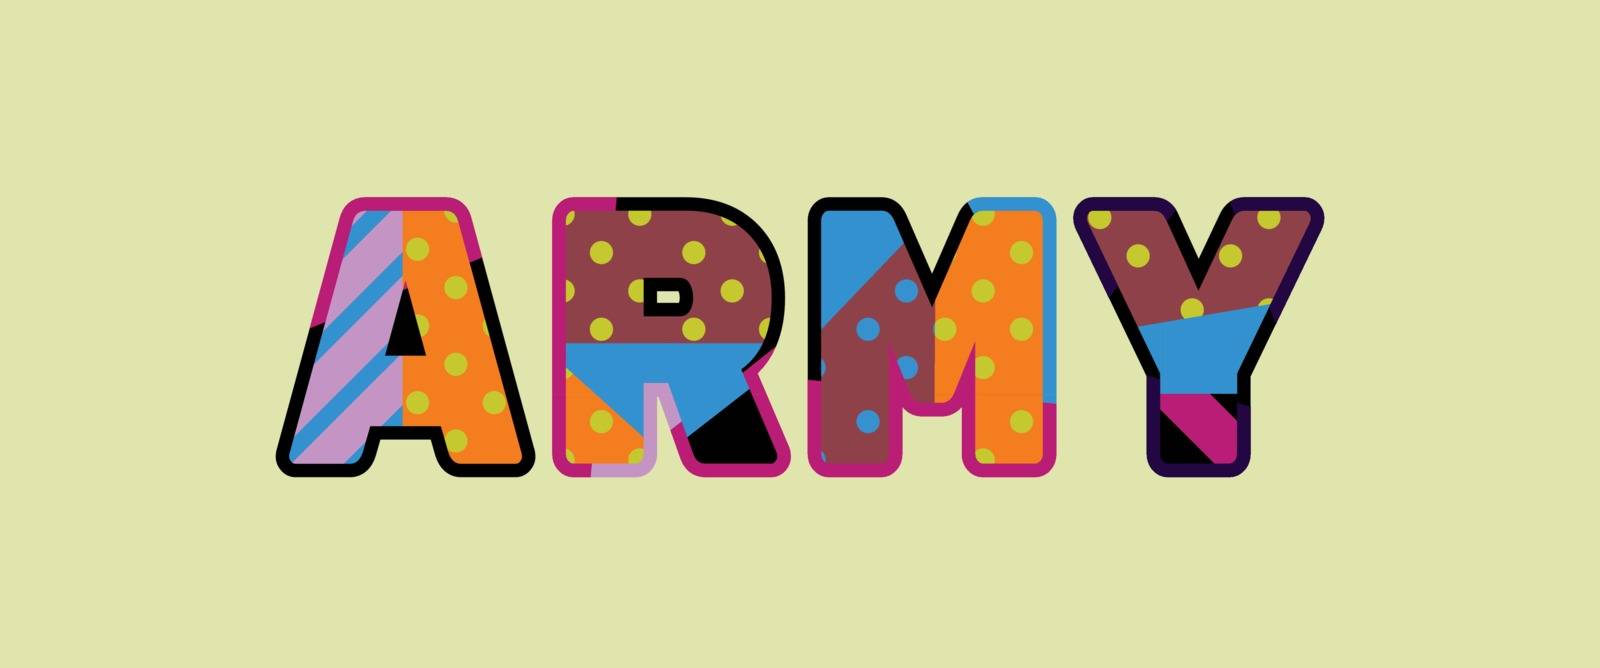 The word ARMY concept written in colorful abstract typography. Vector EPS 10 available.